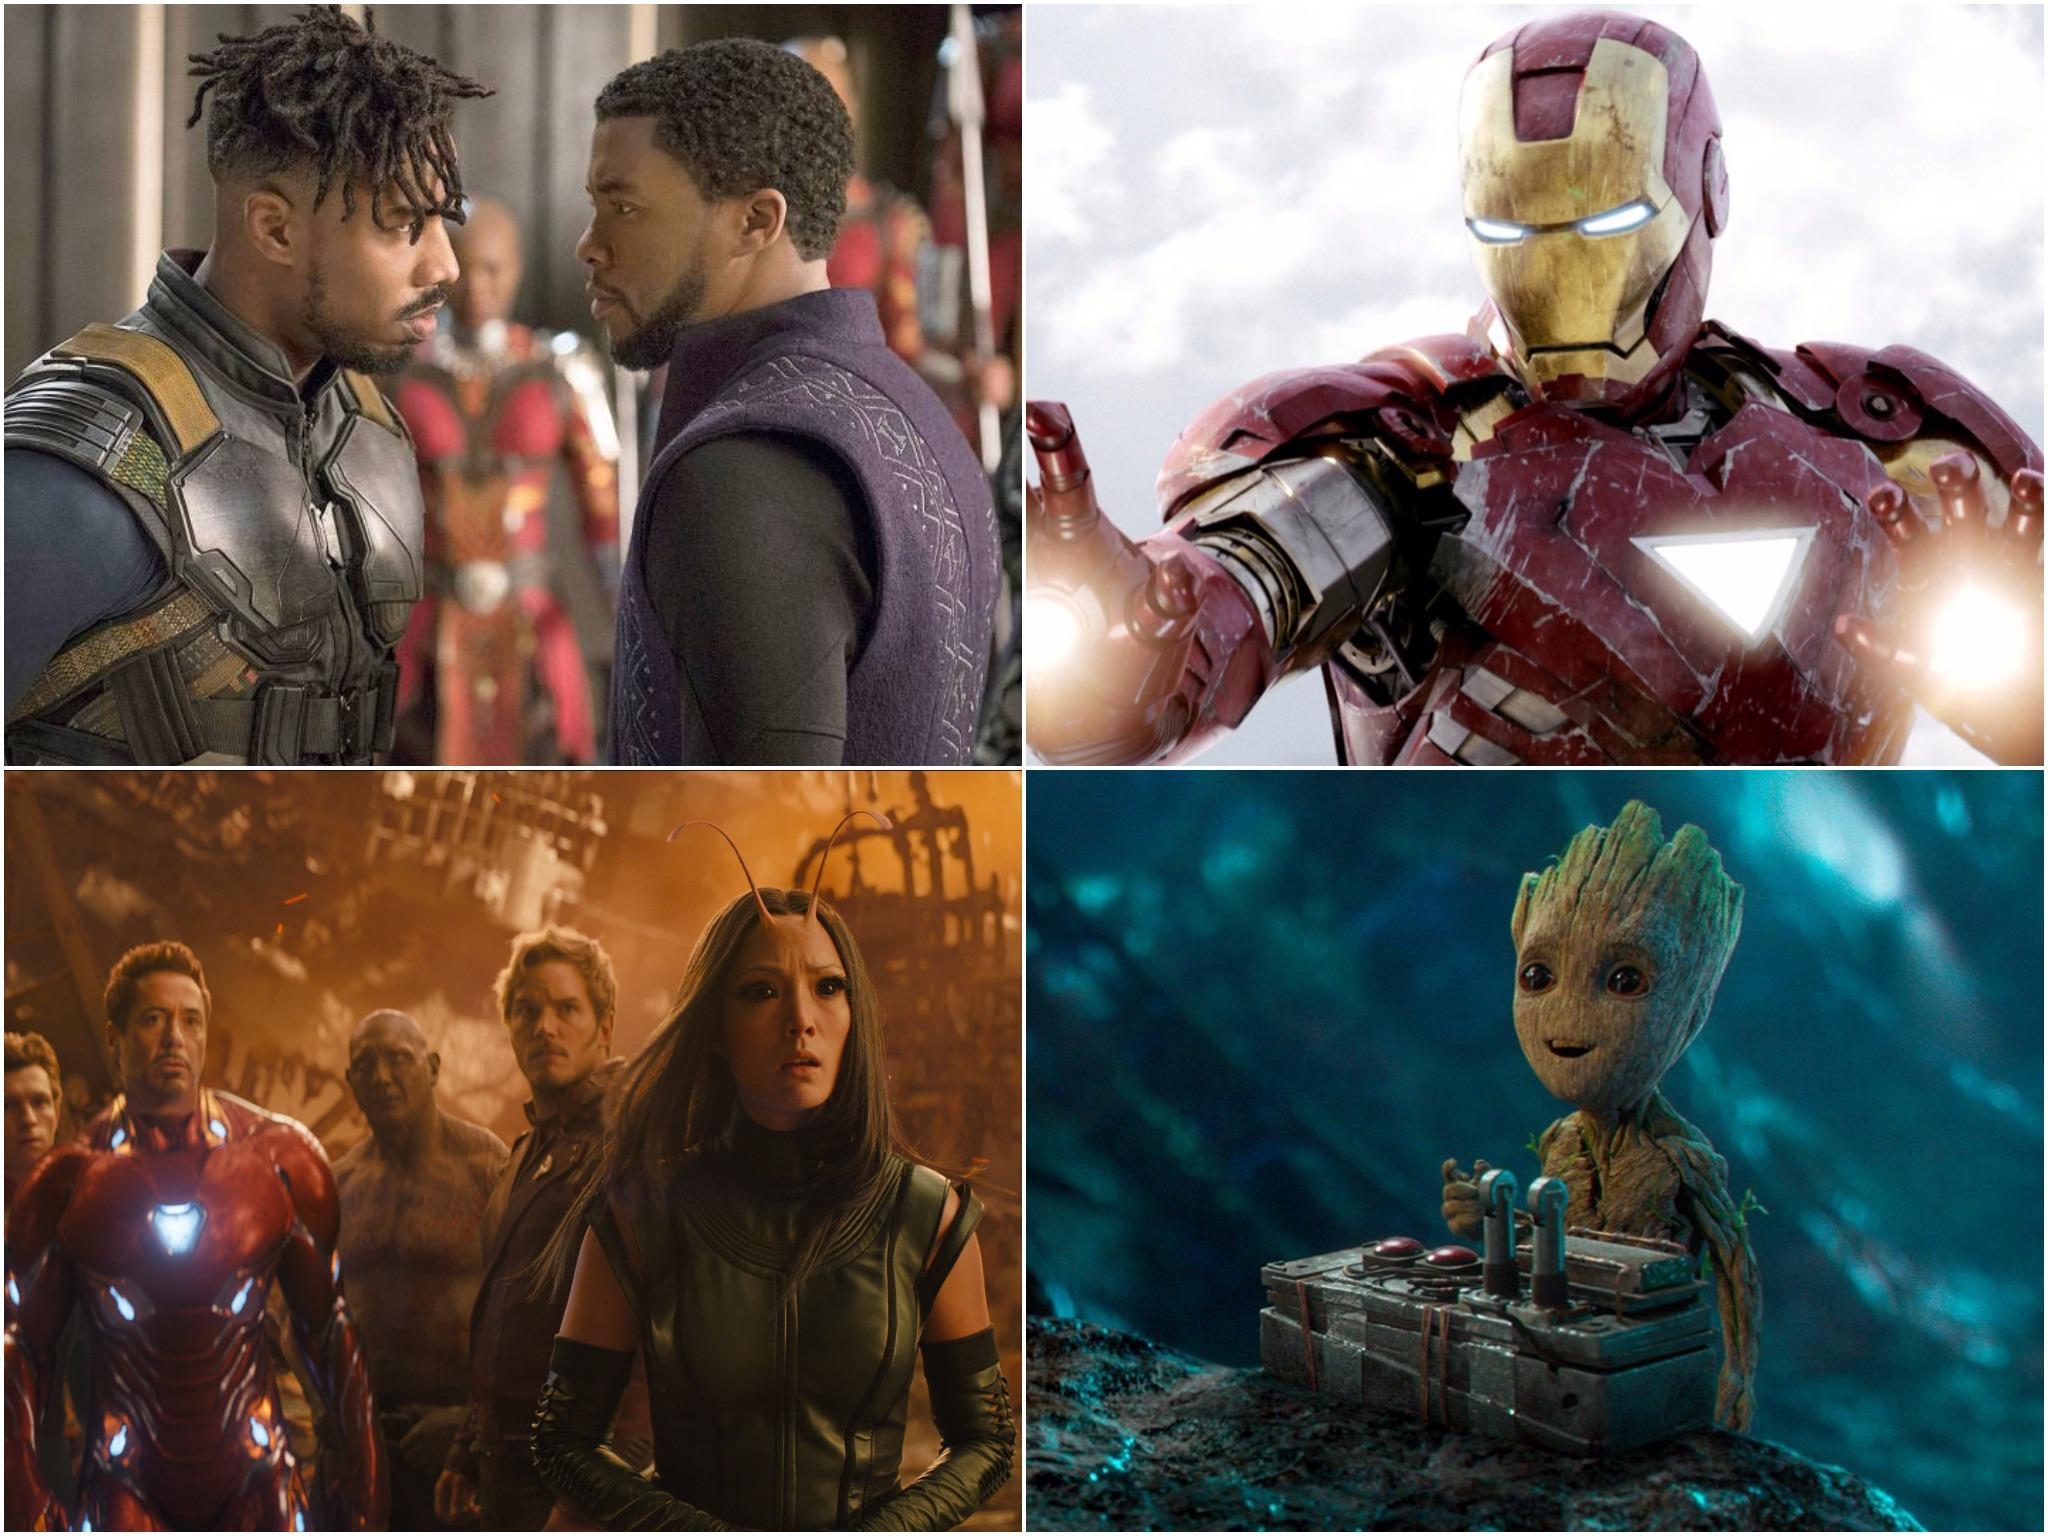 Marvel Cinematic Universe: Every film to date ranked, from worst to best